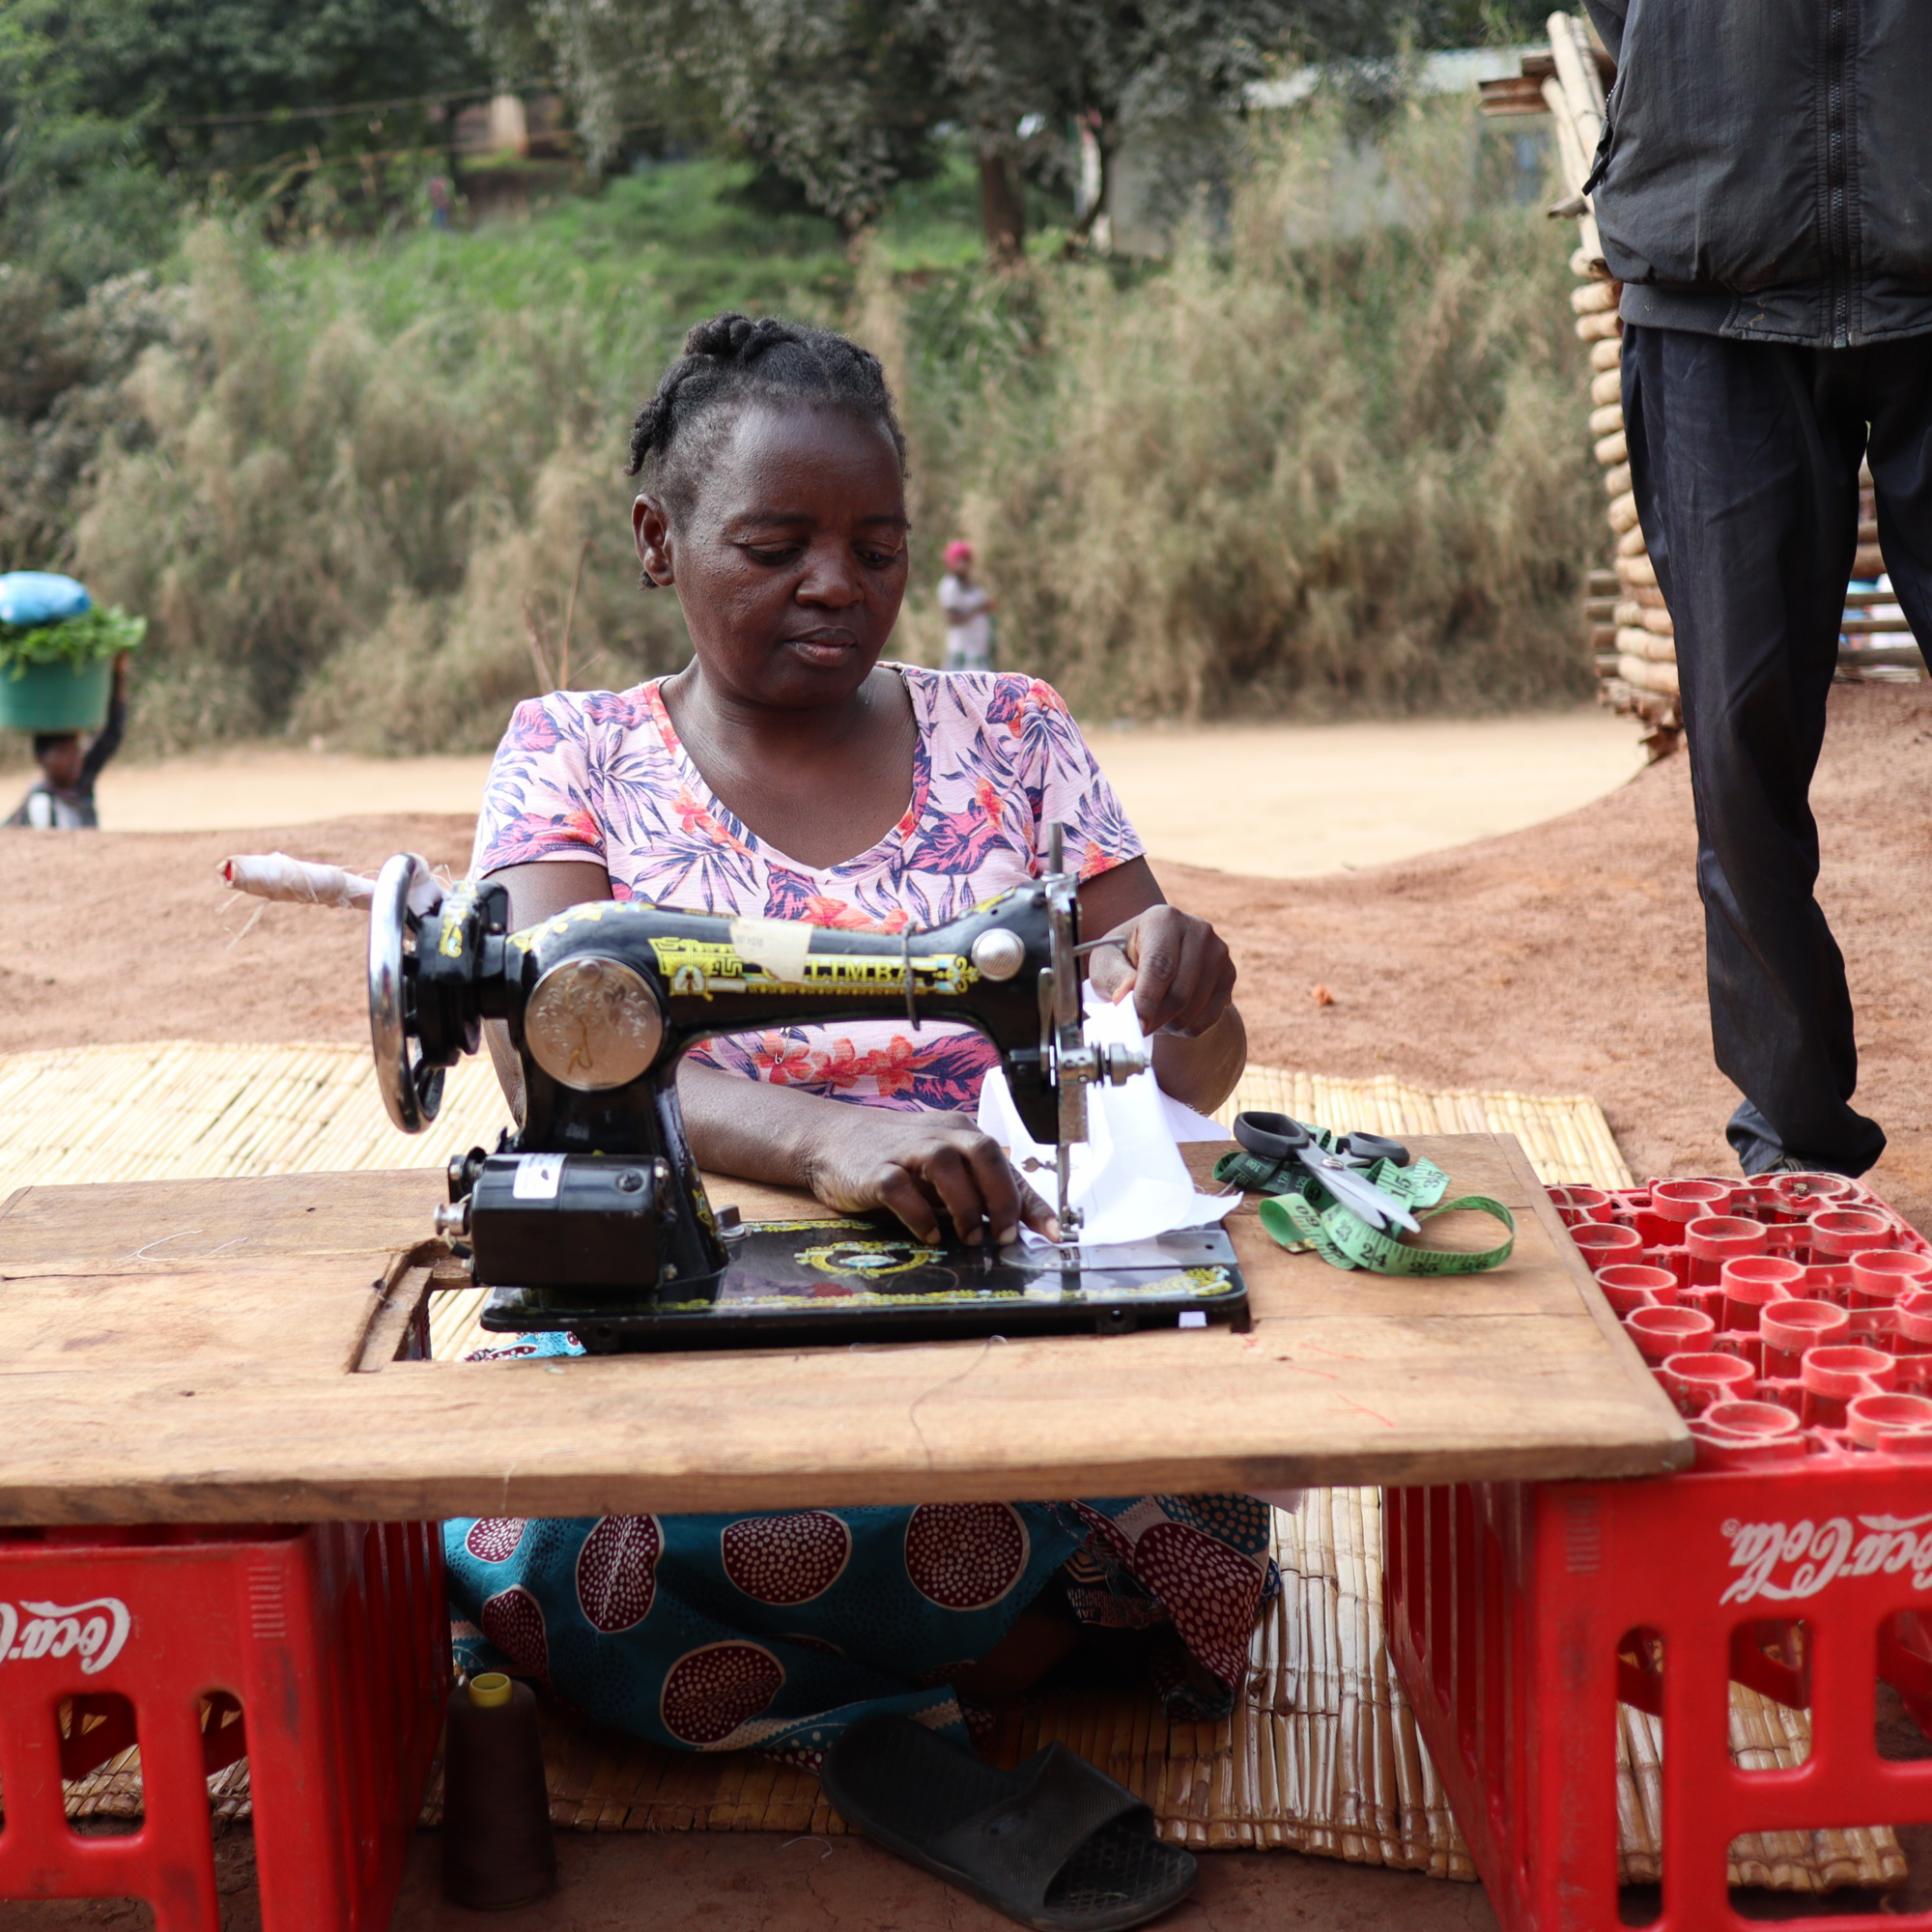 Kulewa now sews after learning this new skill as part of Light for the World's inclusion project in Sofala province, Mozambique